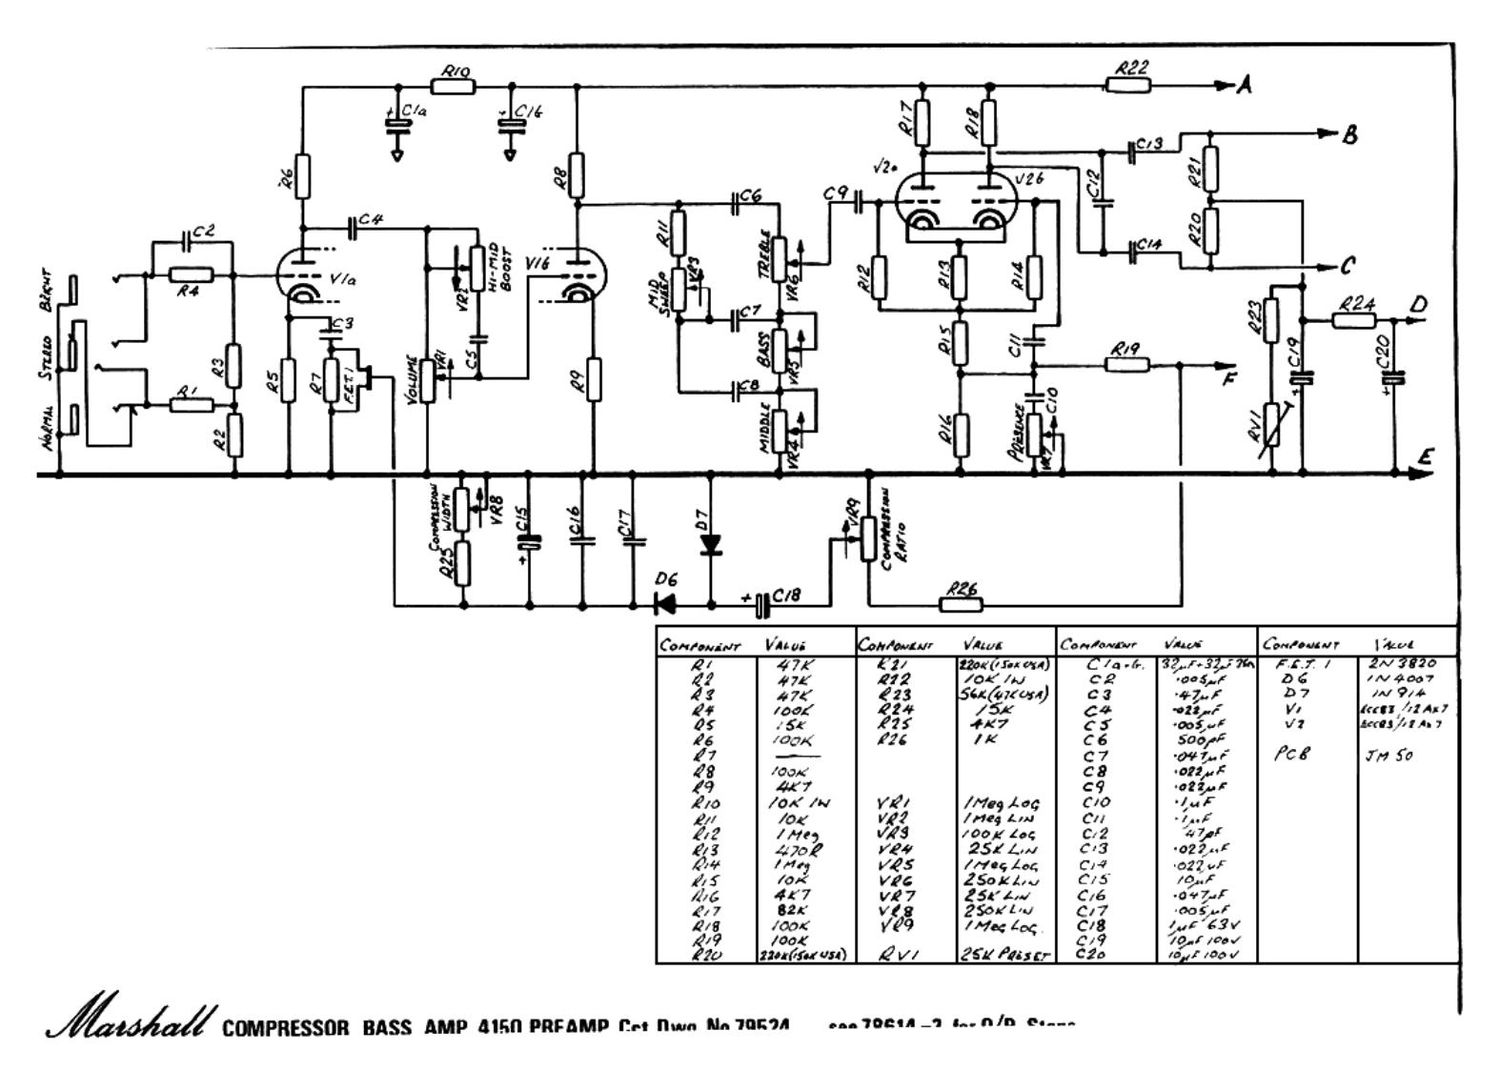 Marshall 4160 Preamp Schematic